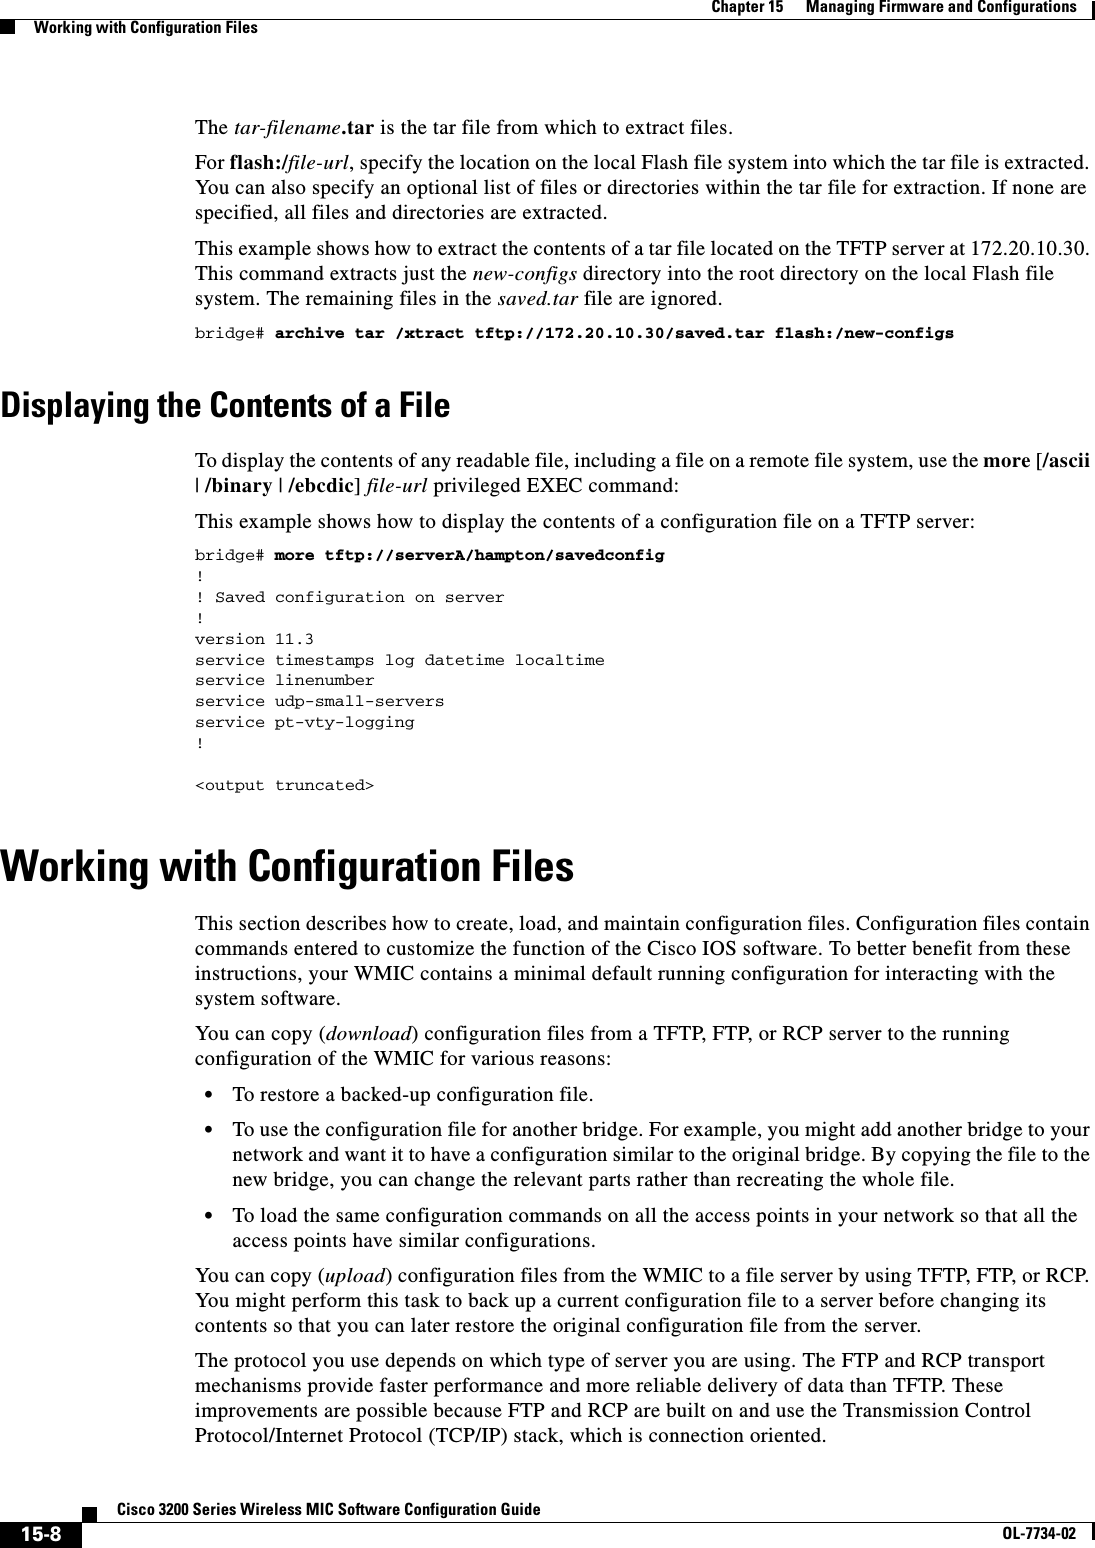 15-8Cisco 3200 Series Wireless MIC Software Configuration GuideOL-7734-02Chapter 15      Managing Firmware and ConfigurationsWorking with Configuration FilesThe tar-filename.tar is the tar file from which to extract files.For flash:/file-url, specify the location on the local Flash file system into which the tar file is extracted. You can also specify an optional list of files or directories within the tar file for extraction. If none are specified, all files and directories are extracted.This example shows how to extract the contents of a tar file located on the TFTP server at 172.20.10.30. This command extracts just the new-configs directory into the root directory on the local Flash file system. The remaining files in the saved.tar file are ignored.bridge# archive tar /xtract tftp://172.20.10.30/saved.tar flash:/new-configsDisplaying the Contents of a FileTo display the contents of any readable file, including a file on a remote file system, use the more [/ascii|/binary | /ebcdic]file-url privileged EXEC command: This example shows how to display the contents of a configuration file on a TFTP server:bridge# more tftp://serverA/hampton/savedconfig!! Saved configuration on server!version 11.3service timestamps log datetime localtimeservice linenumberservice udp-small-serversservice pt-vty-logging!&lt;output truncated&gt;Working with Configuration FilesThis section describes how to create, load, and maintain configuration files. Configuration files contain commands entered to customize the function of the Cisco IOS software. To better benefit from these instructions, your WMIC contains a minimal default running configuration for interacting with the system software. You  ca n c opy  (download) configuration files from a TFTP, FTP, or RCP server to the running configuration of the WMIC for various reasons:•To restore a backed-up configuration file.•To use the configuration file for another bridge. For example, you might add another bridge to your network and want it to have a configuration similar to the original bridge. By copying the file to the new bridge, you can change the relevant parts rather than recreating the whole file.•To load the same configuration commands on all the access points in your network so that all the access points have similar configurations.You can copy (upload) configuration files from the WMIC to a file server by using TFTP, FTP, or RCP. You might perform this task to back up a current configuration file to a server before changing its contents so that you can later restore the original configuration file from the server. The protocol you use depends on which type of server you are using. The FTP and RCP transport mechanisms provide faster performance and more reliable delivery of data than TFTP. These improvements are possible because FTP and RCP are built on and use the Transmission Control Protocol/Internet Protocol (TCP/IP) stack, which is connection oriented.